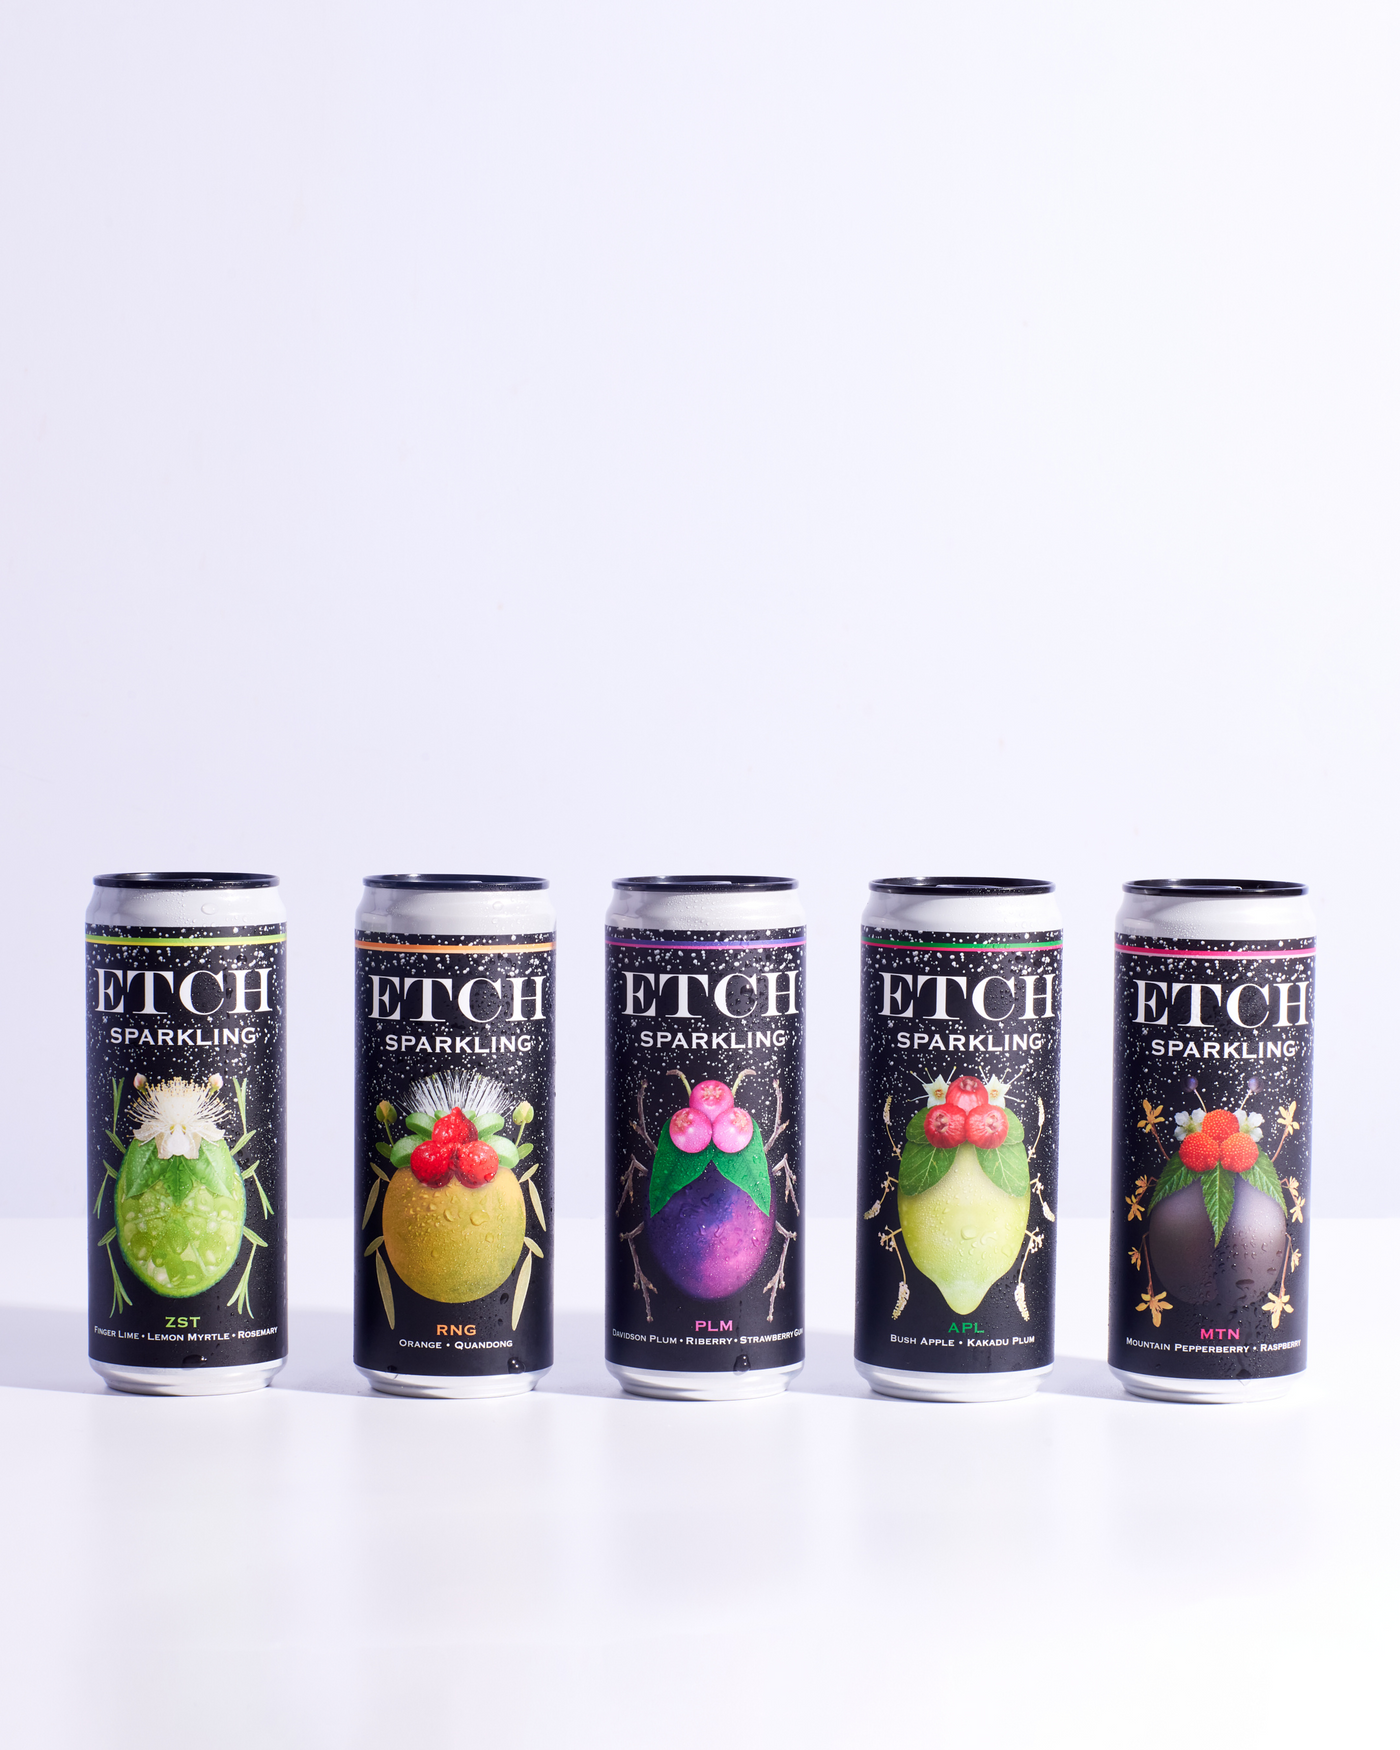 MIXED Case 12 Pack 330ml cans featuring all ETCH flavours